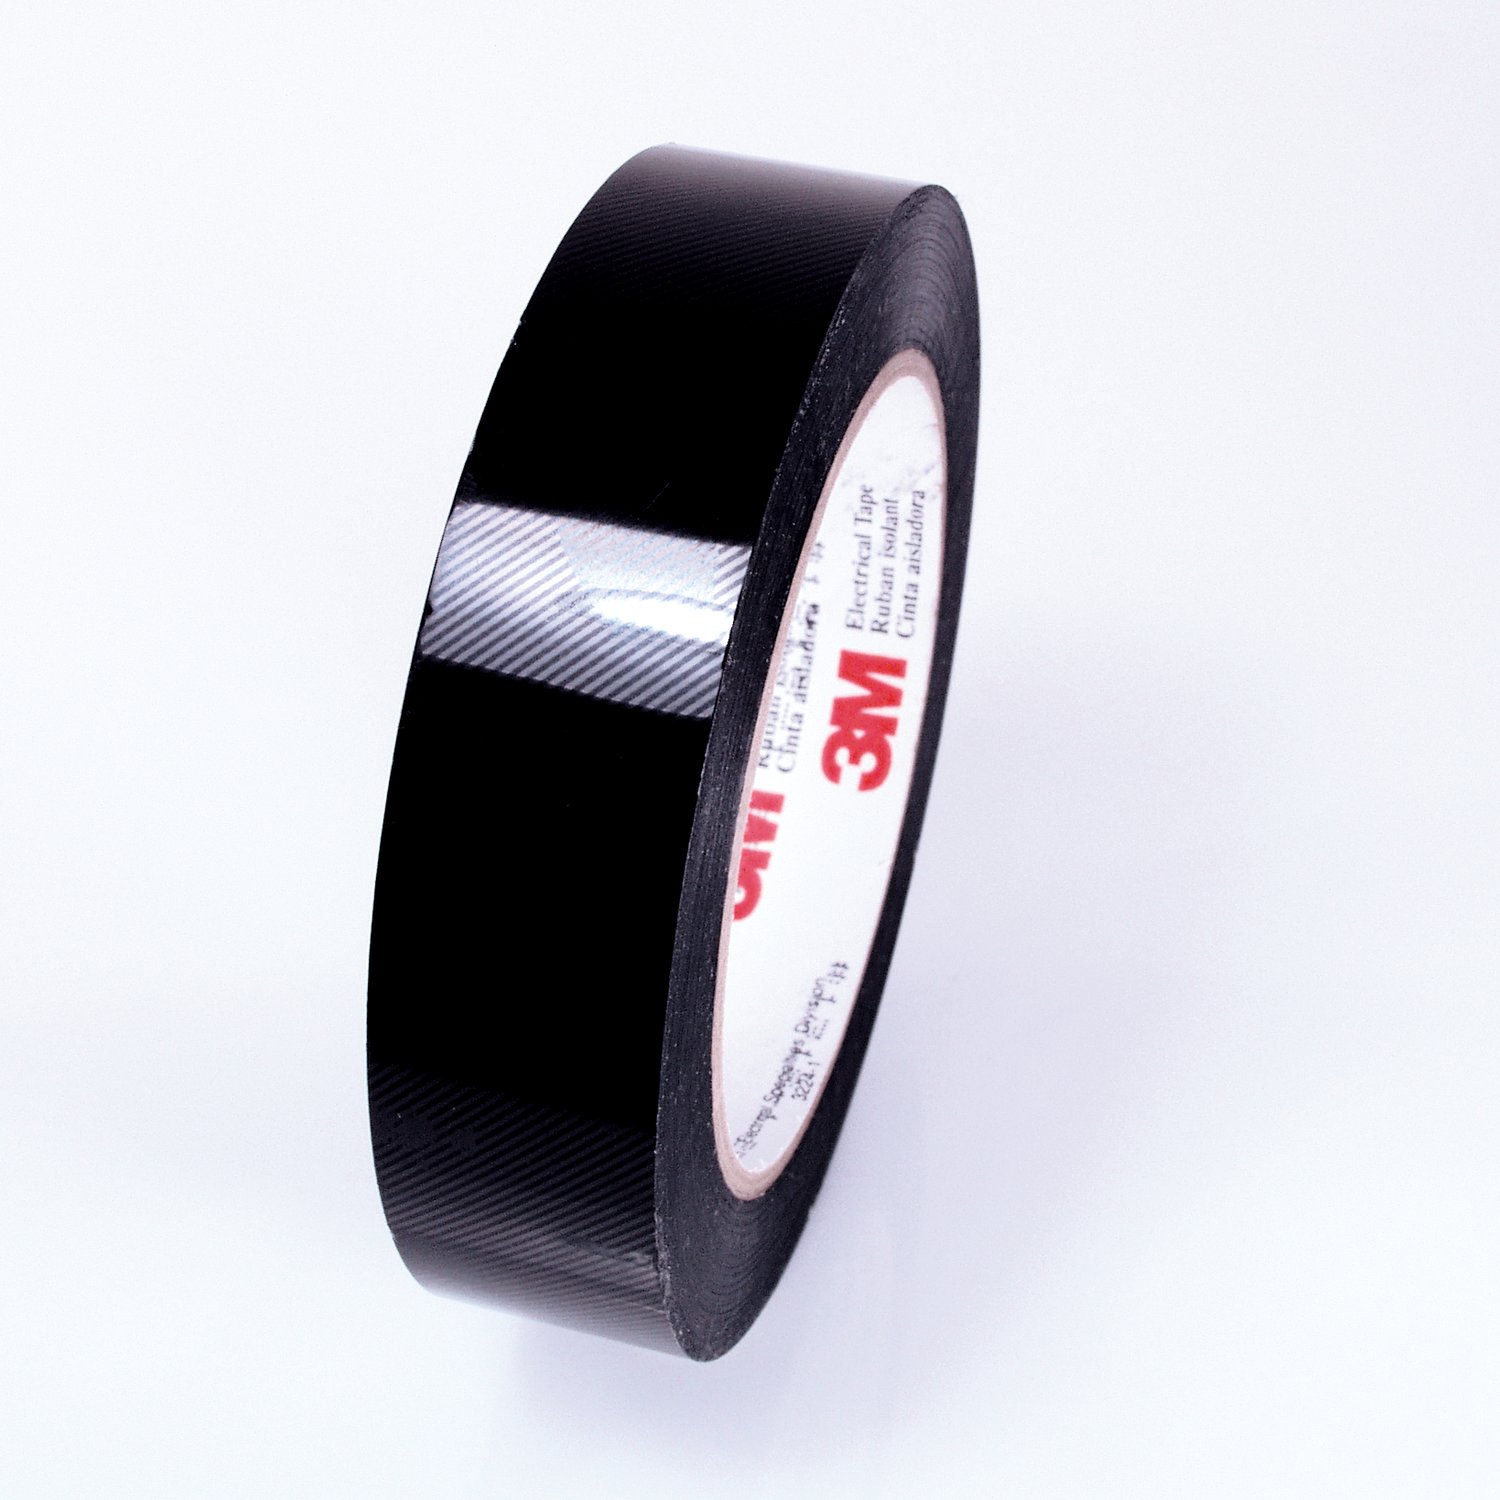 7000132838 - 3M Polyester Film Electrical Tape 1350F-1, 24 in 72 yd Log, 3-in
plastic core, Log roll, Black, 1 Roll/Case